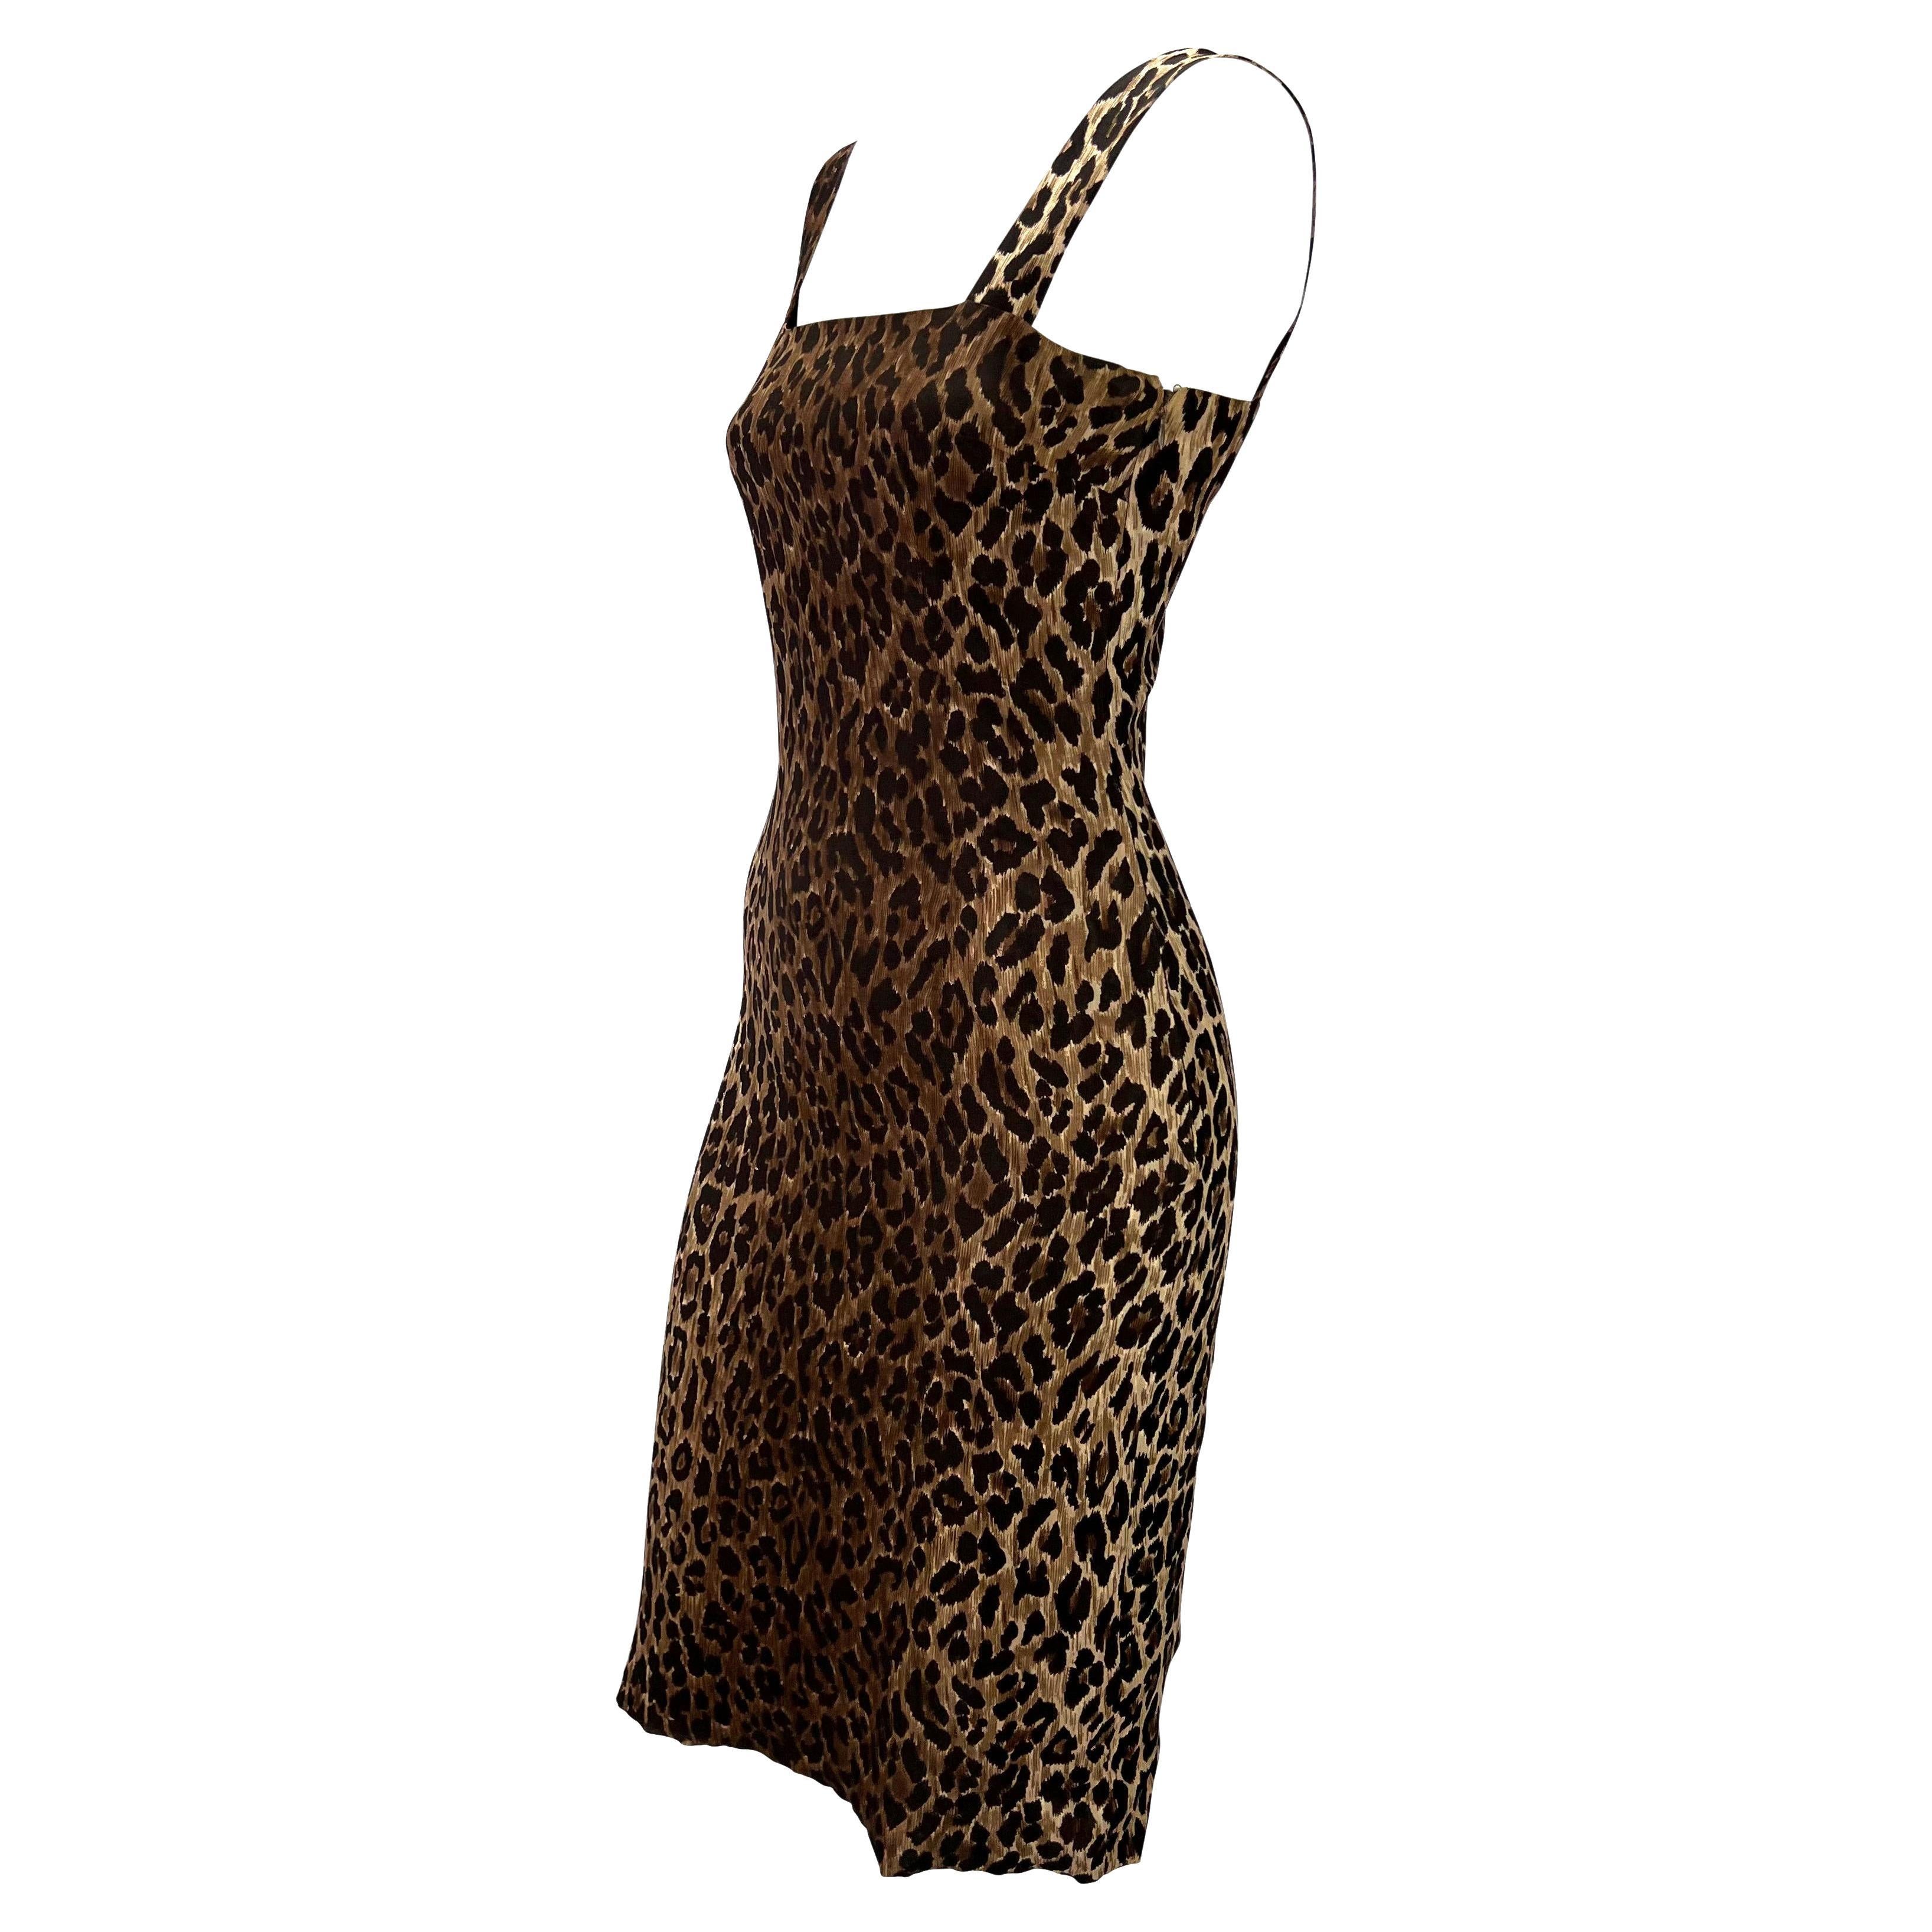 Presenting a beautiful mid-length cheetah print Dolce and Gabbana dress. From the Spring/Summer 1997 collection, this effortlessly chic slip dress is constructed of semi-sheer fabric covered in the season's cheetah print. The sleeveless dress